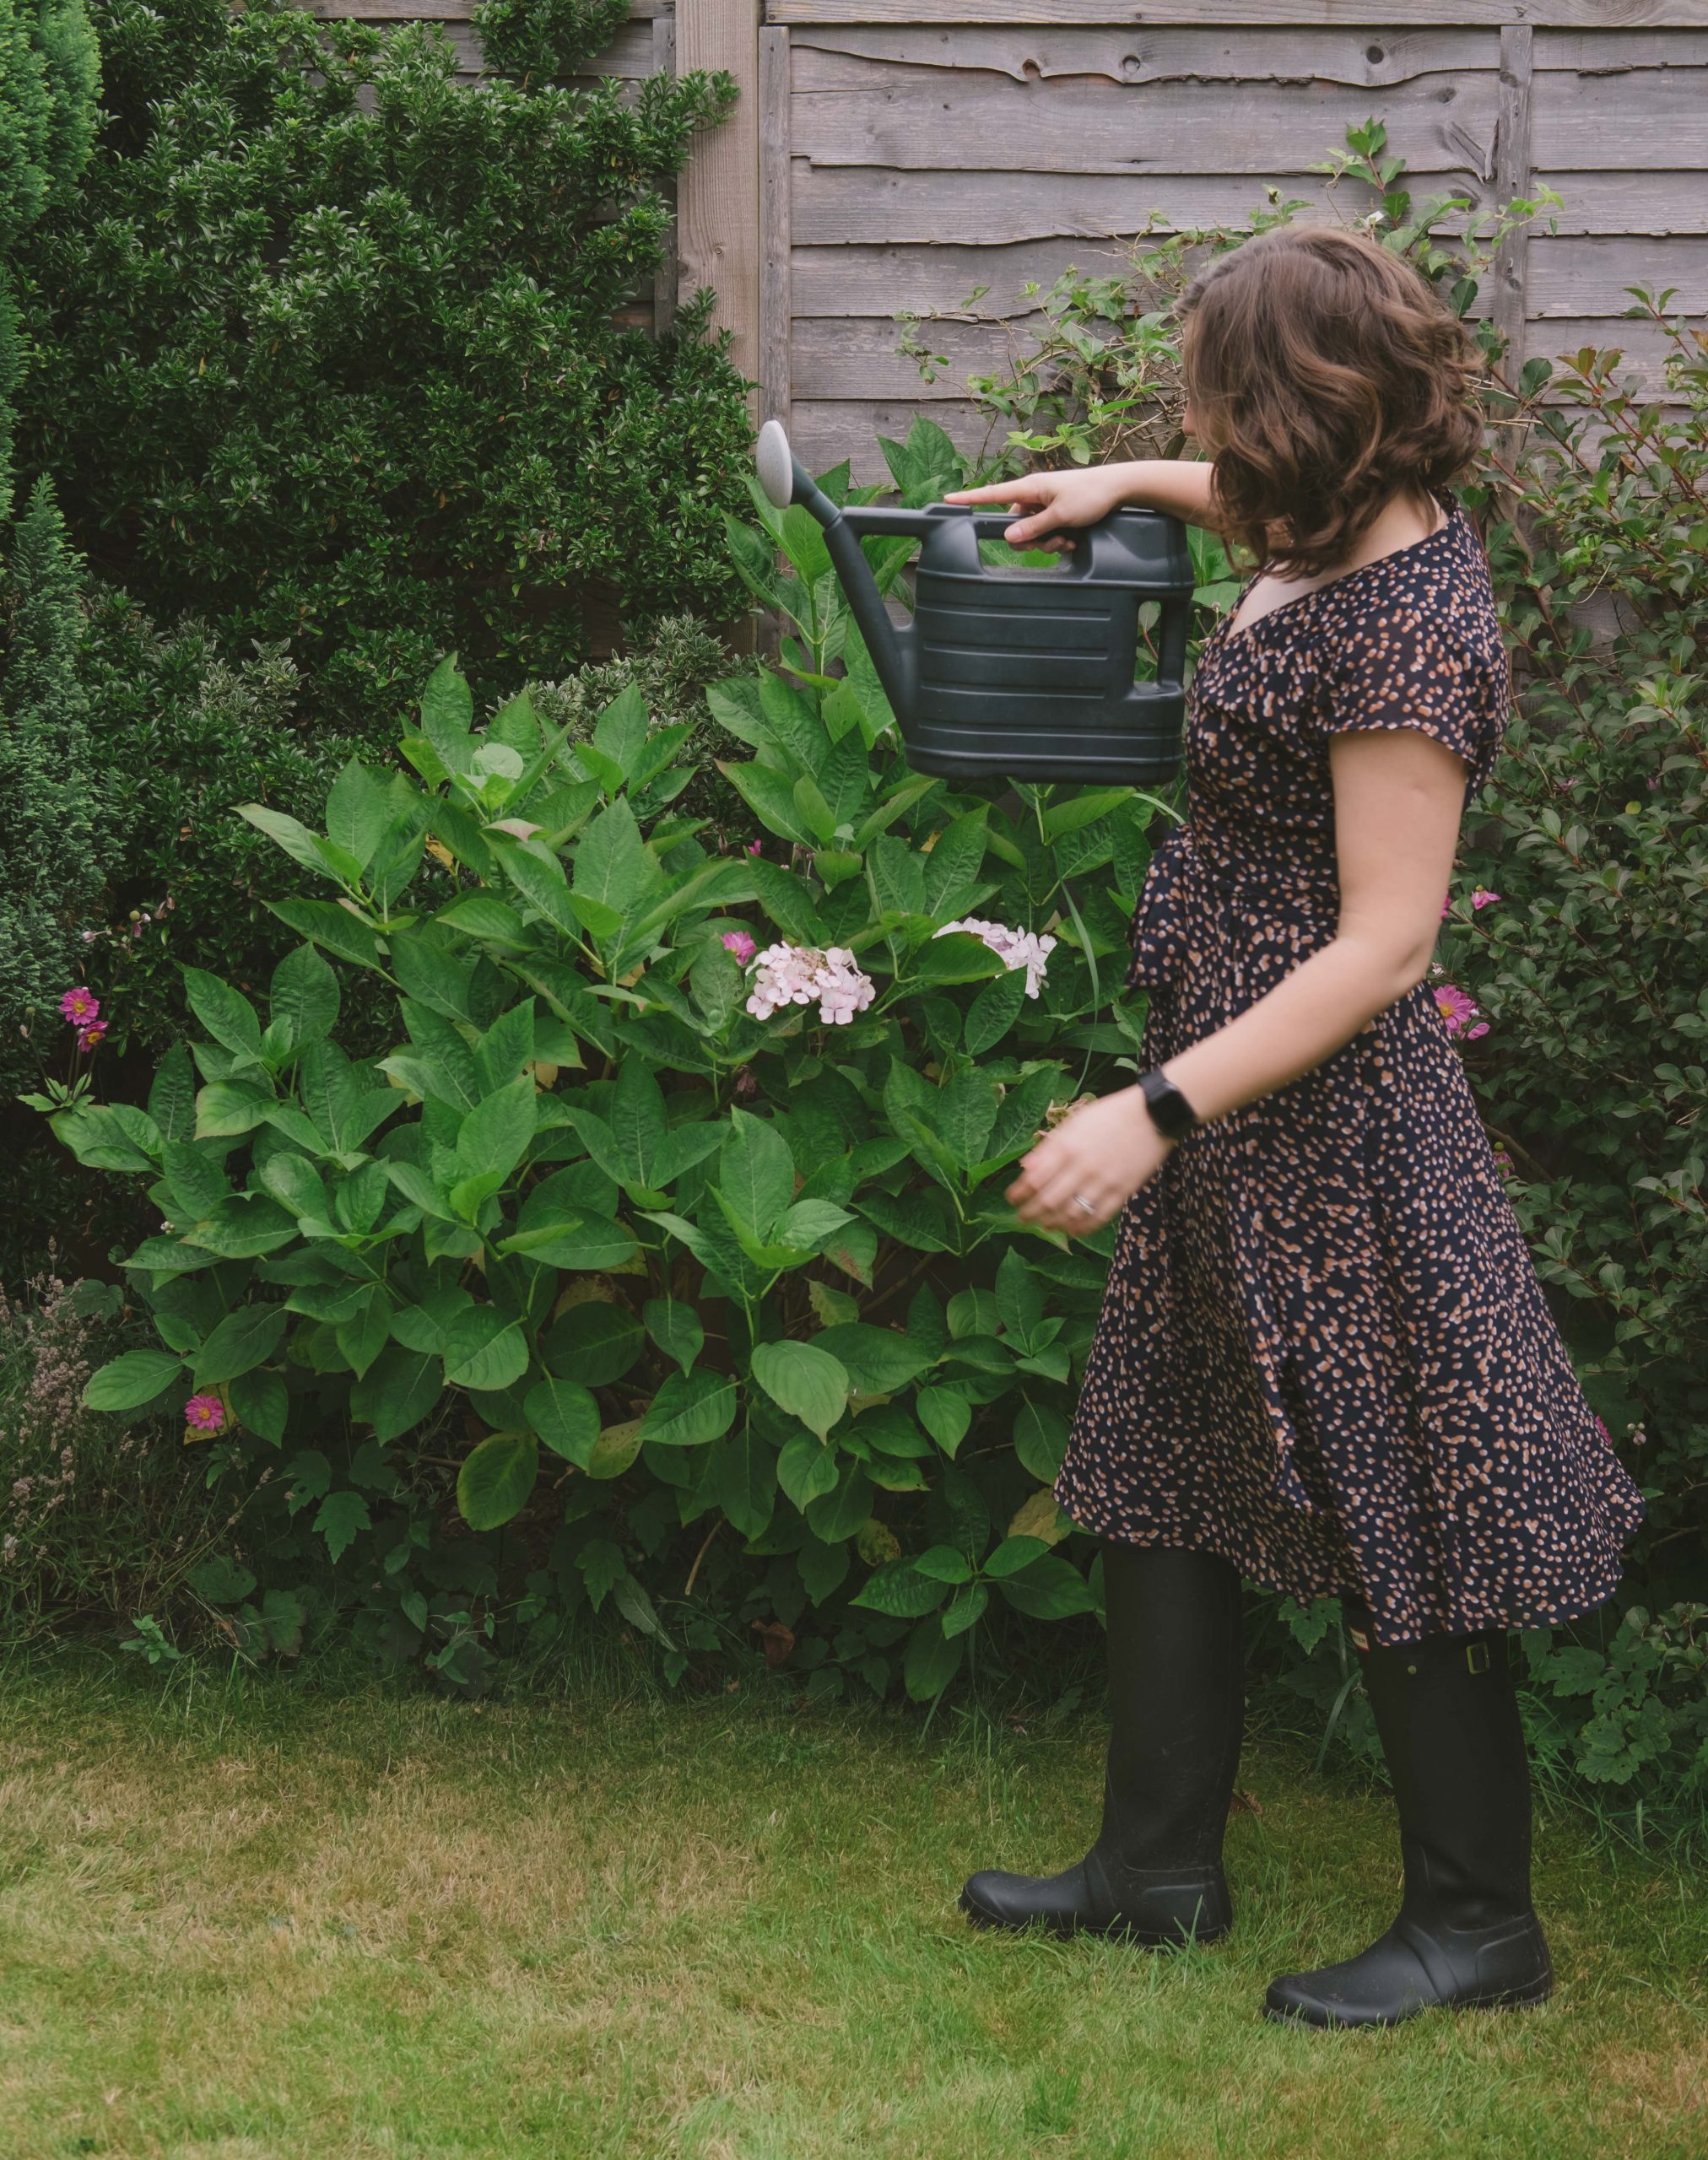 Cory wearing her Aries dress from Bluffworks and watering the plants in a garden during a staycation in the UK